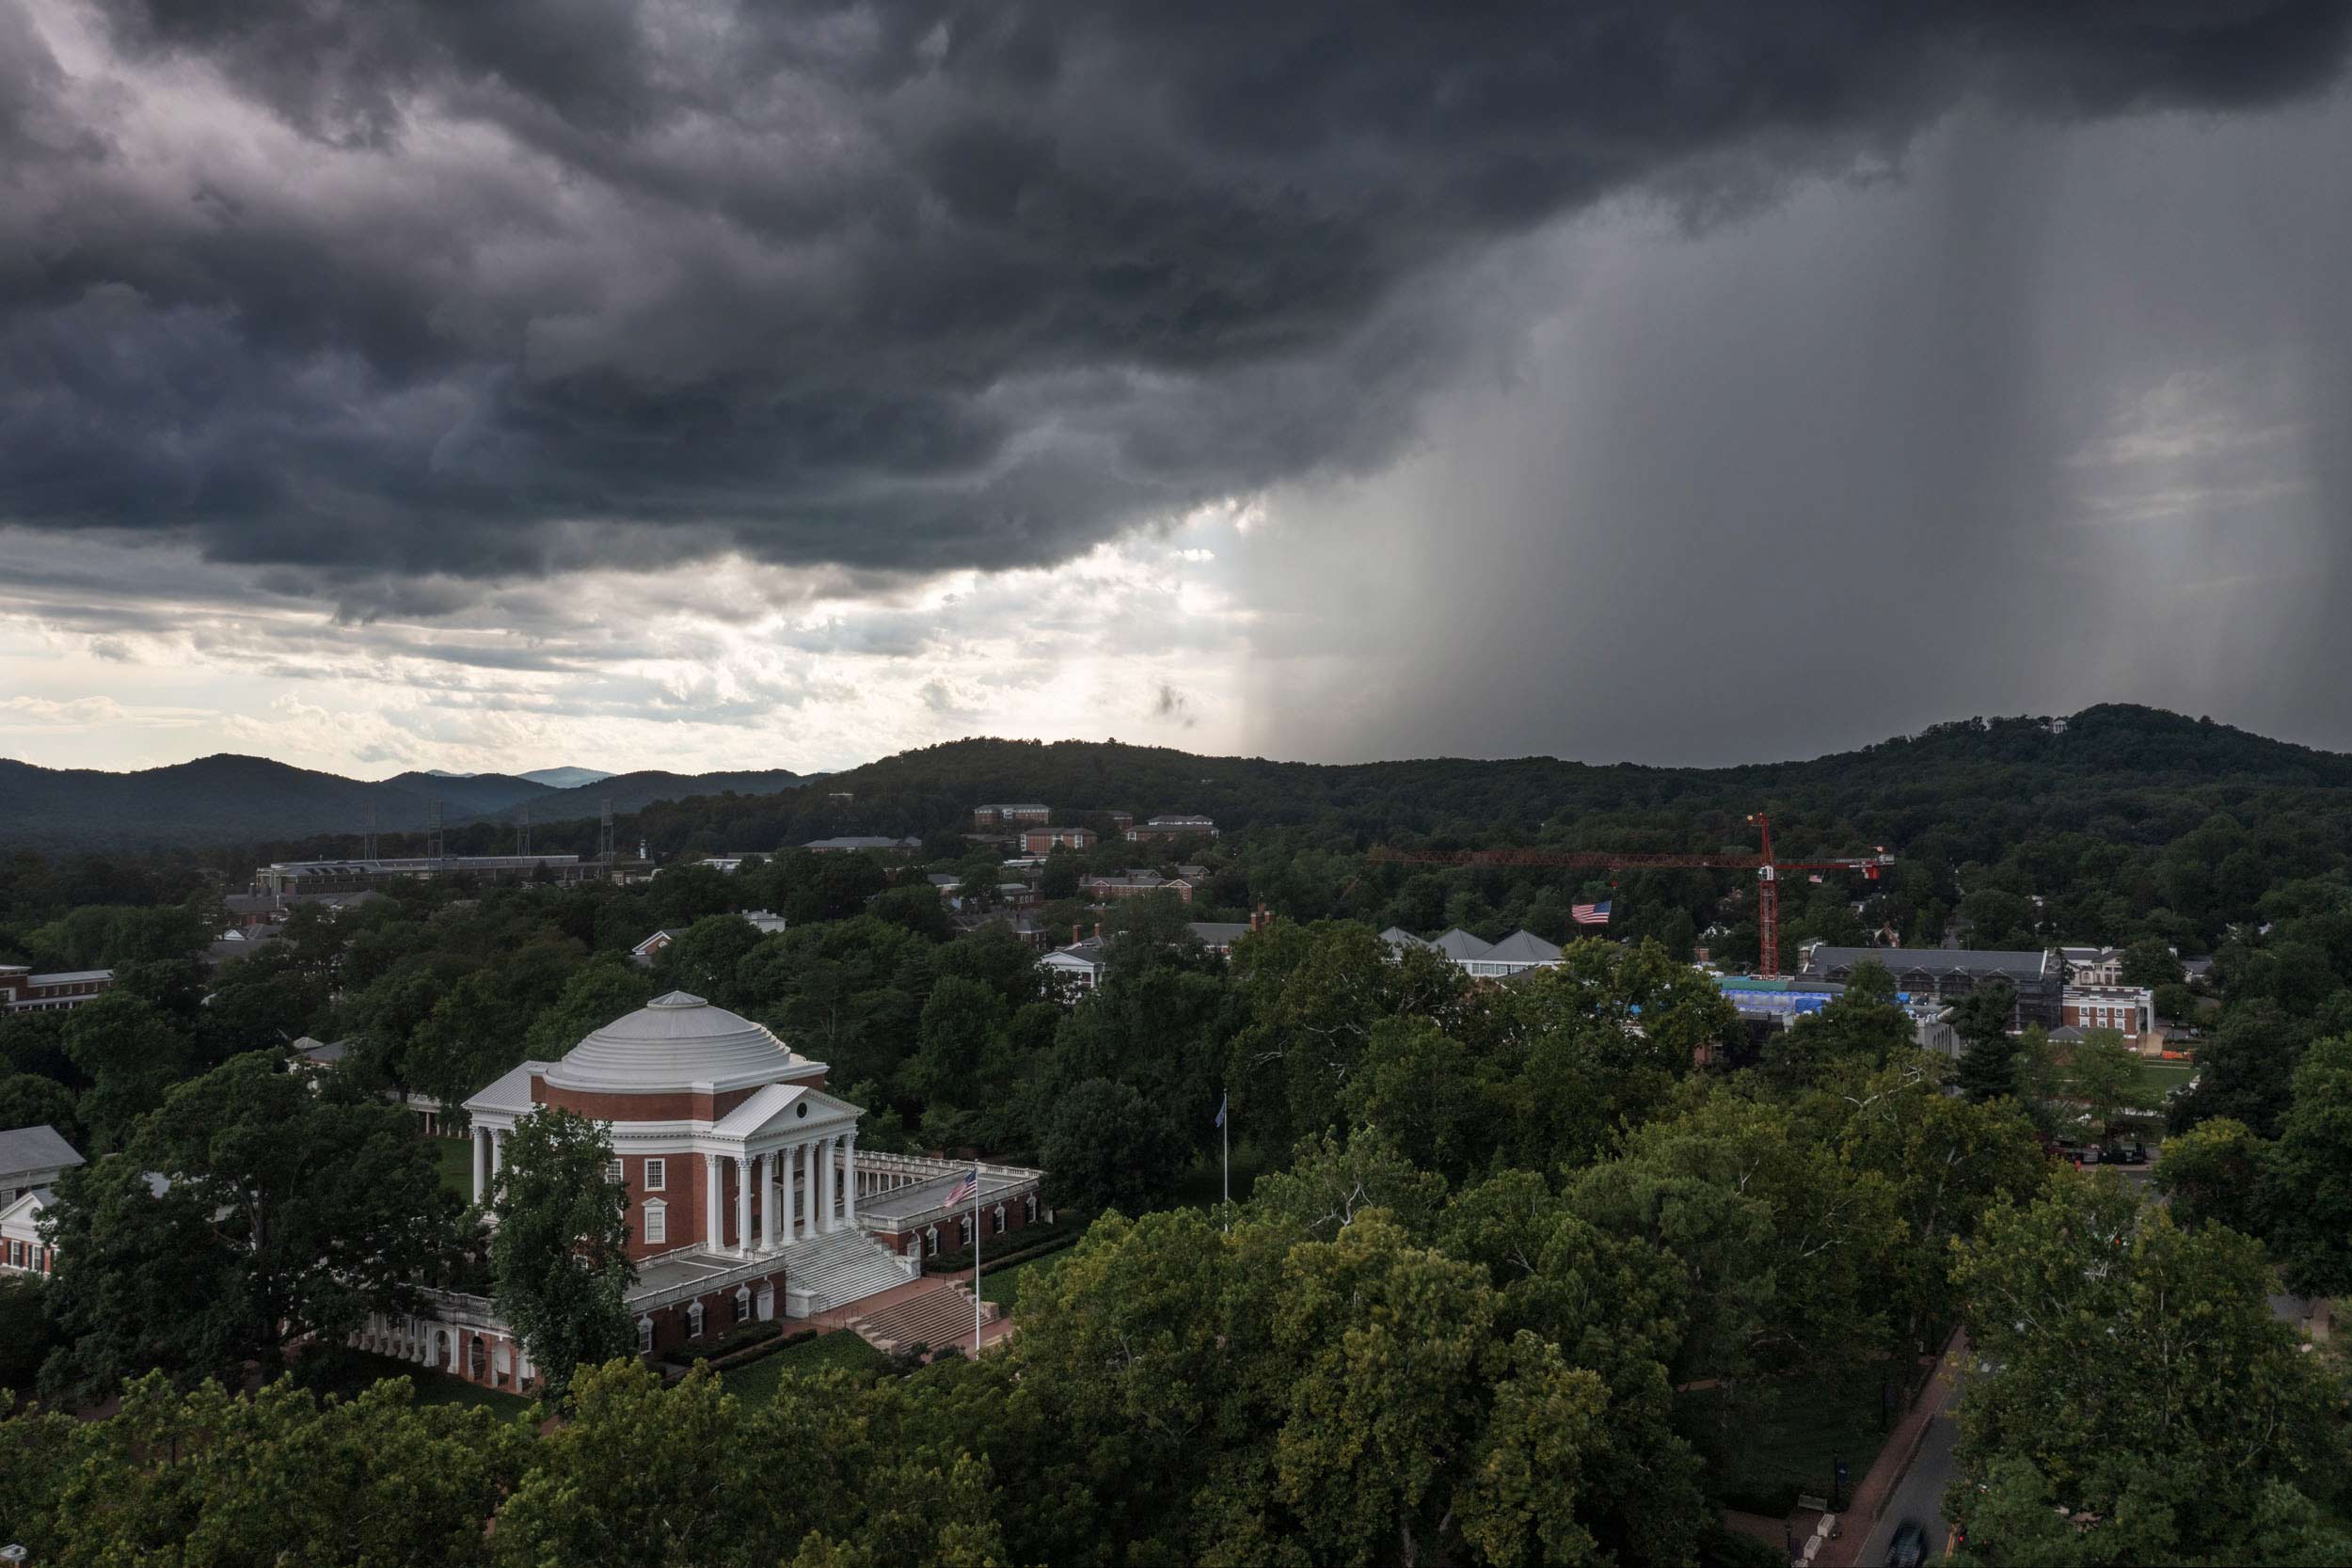 An aerial view of UVA Grounds with dark clouds. On the left is the rotunda, on the right is a wall of rain.